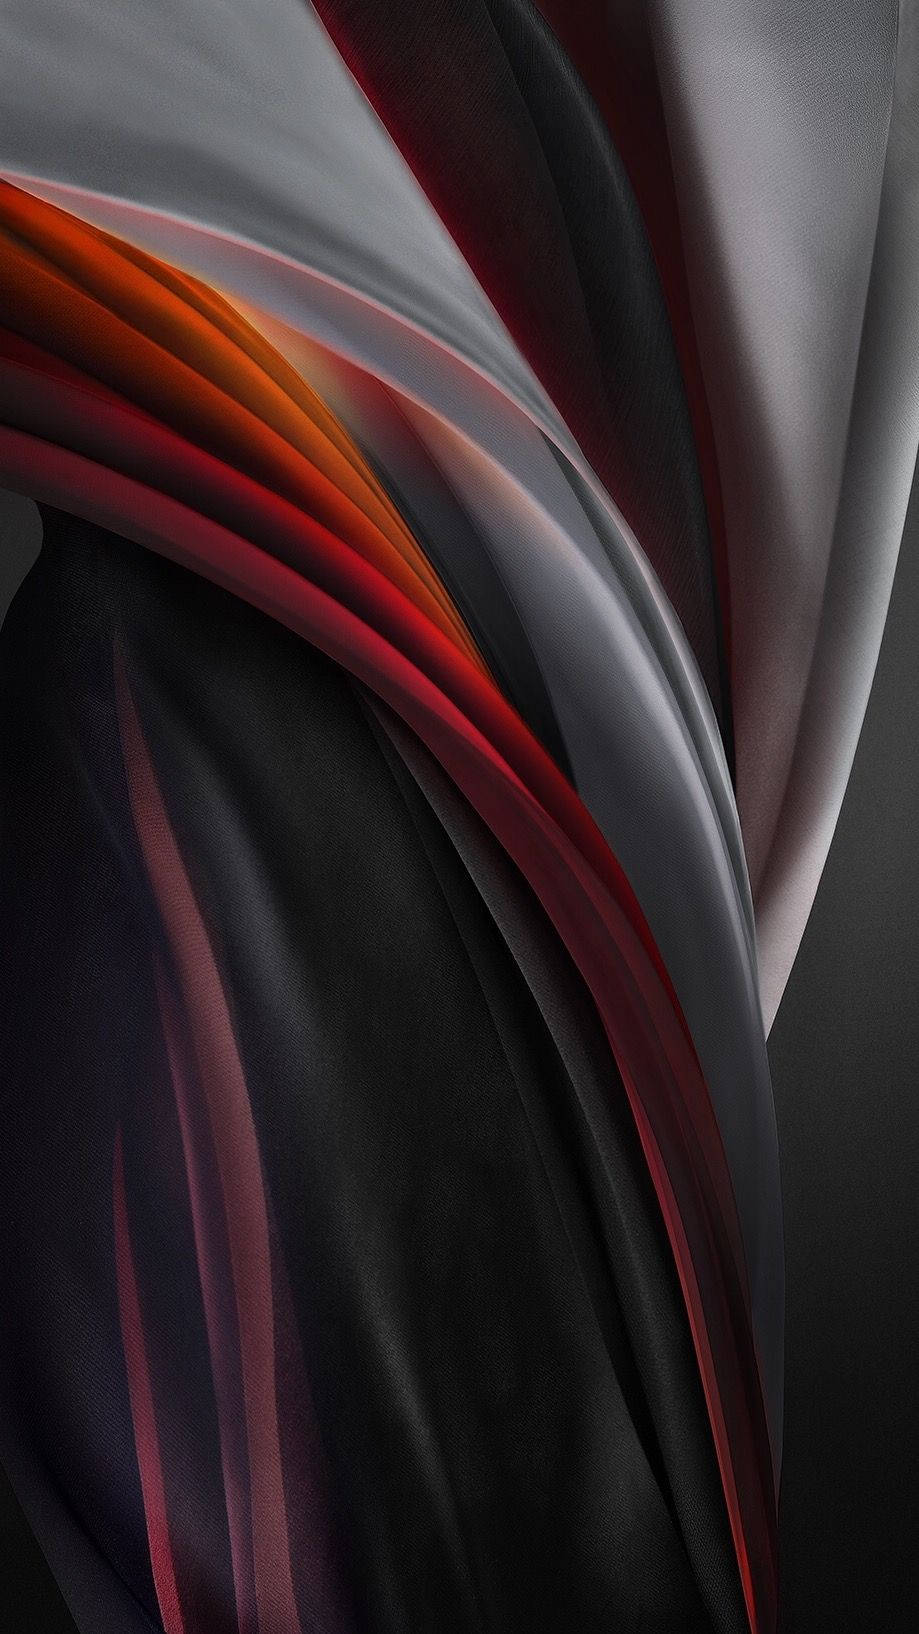 Unlock new possibilities with the Apple Iphone SE 2020 Wallpaper